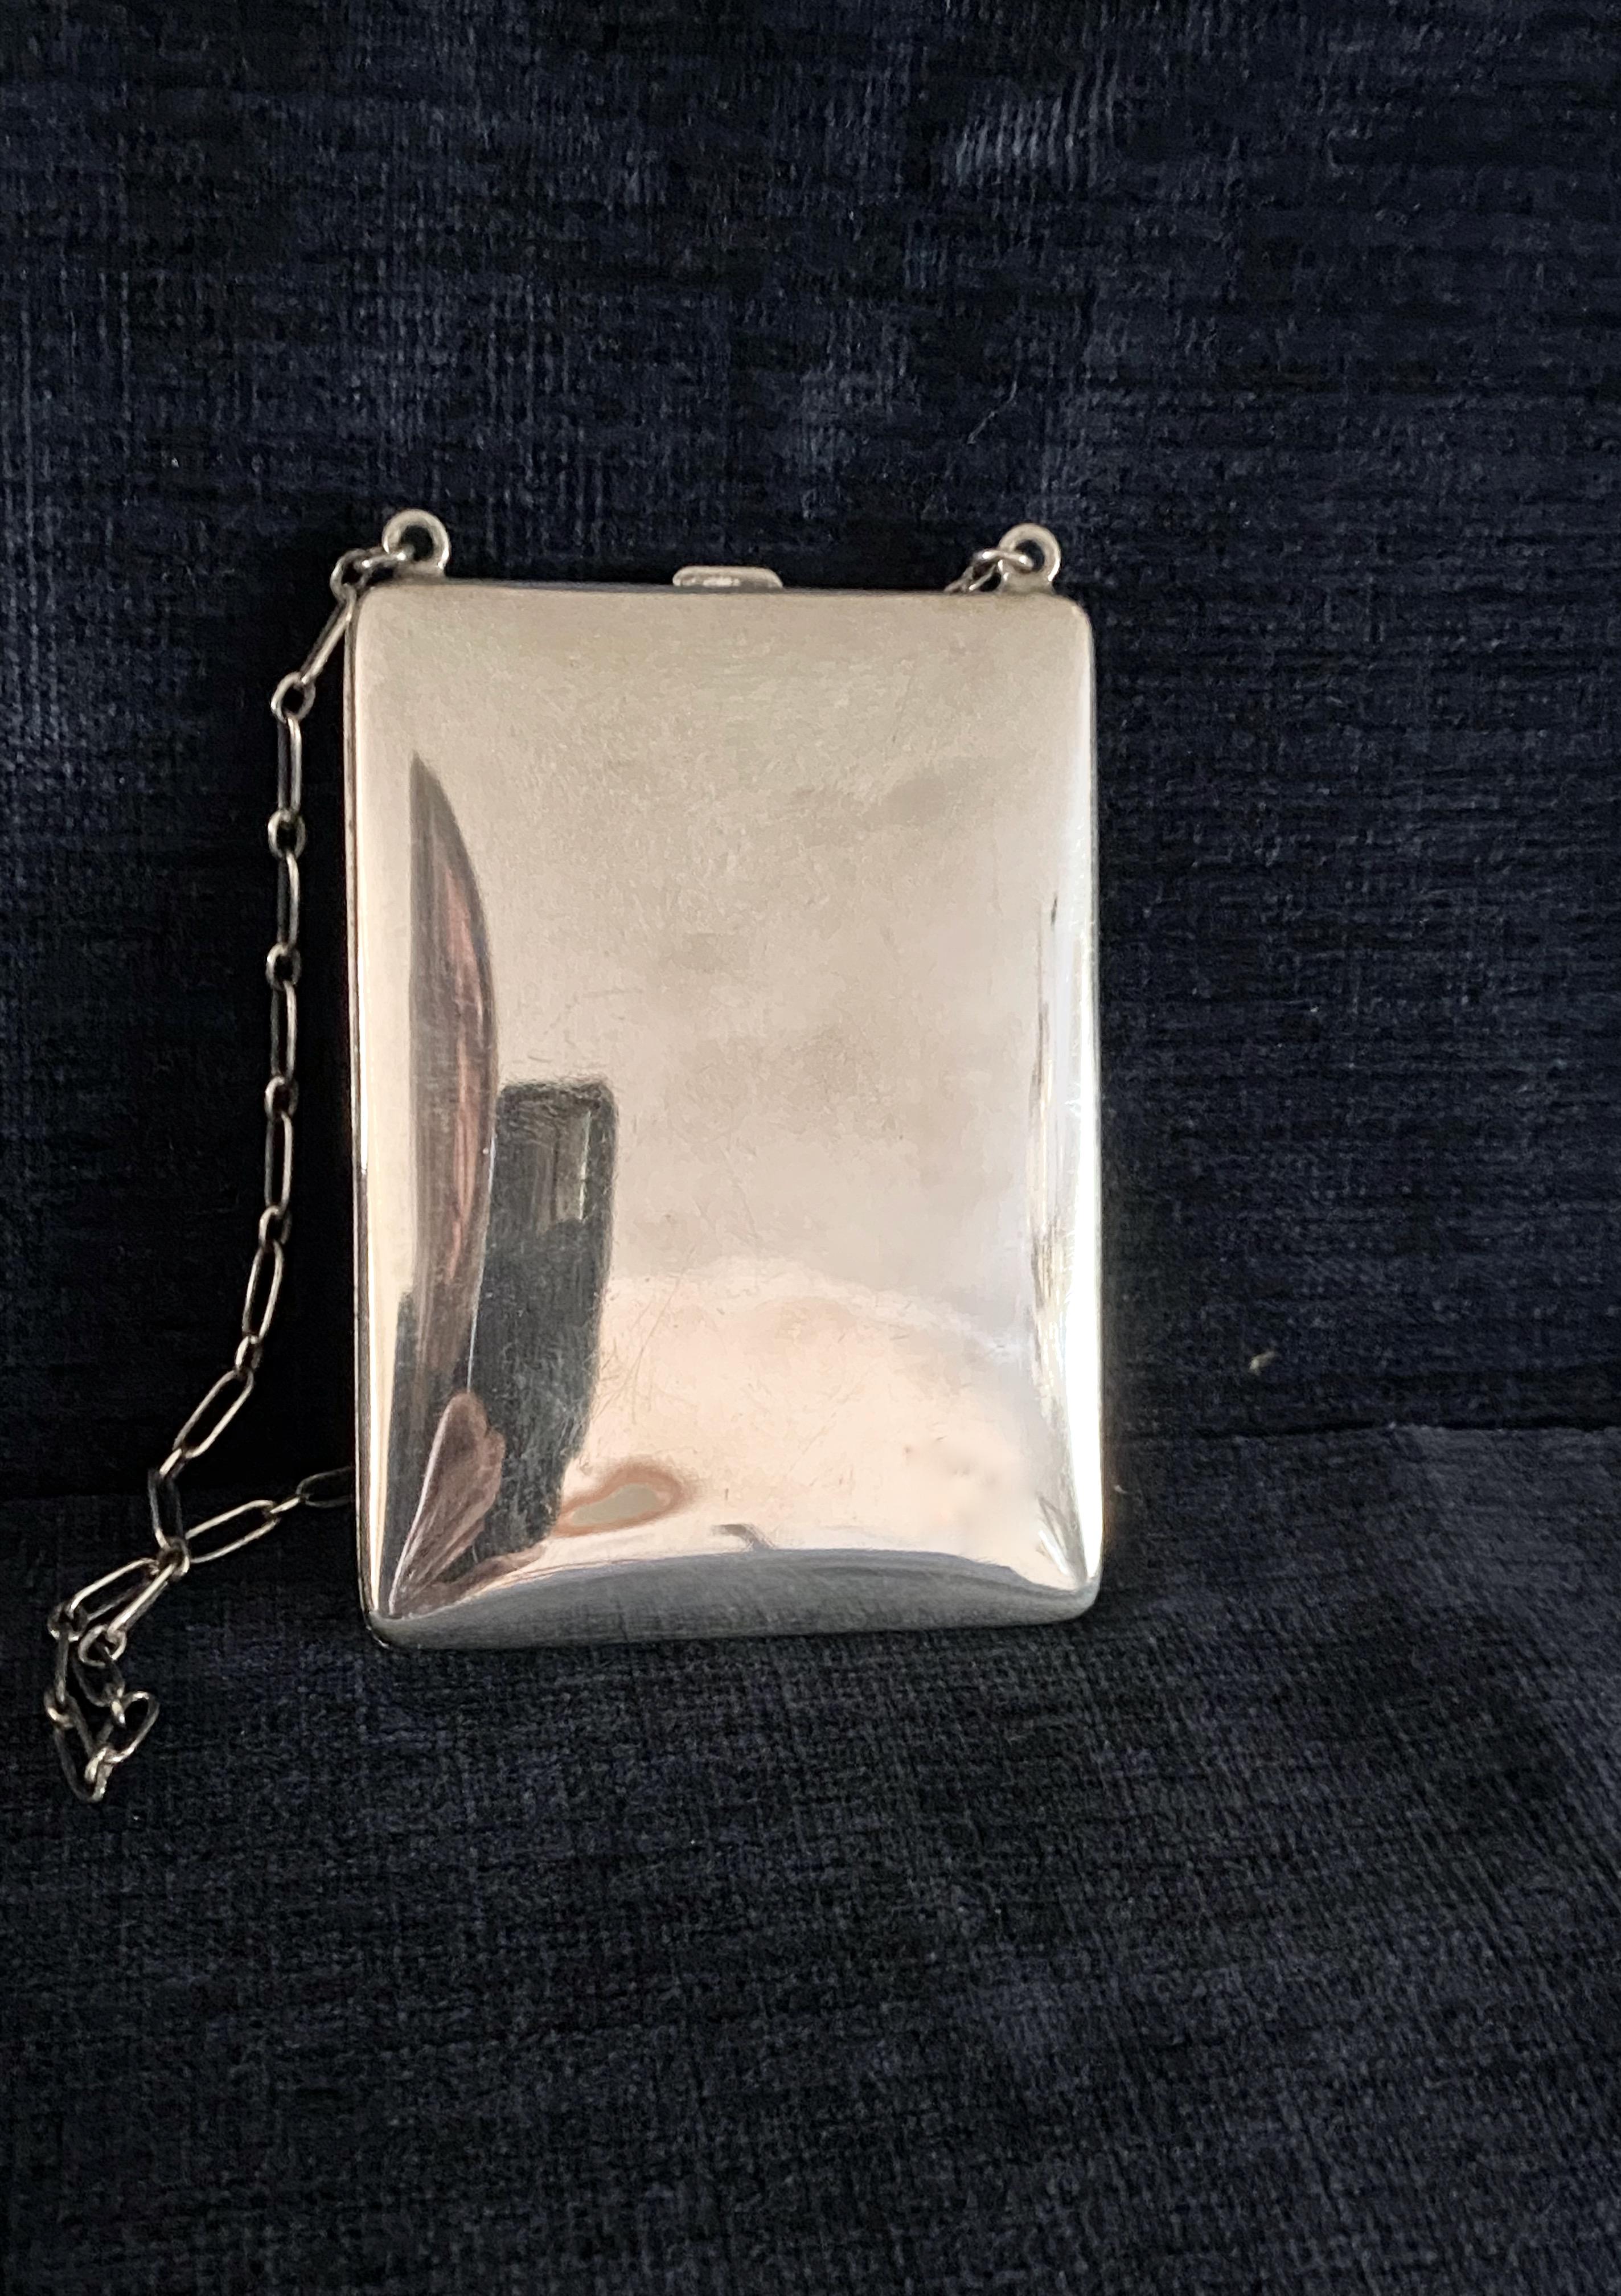 This is a beautifully crafted Art Deco period Sterling Silver Lady's Compact or necessaire. This stunning engraved and monogrammed compact opens to reveal a sterling silver interior with fittings for two different types of coins and a covered powder